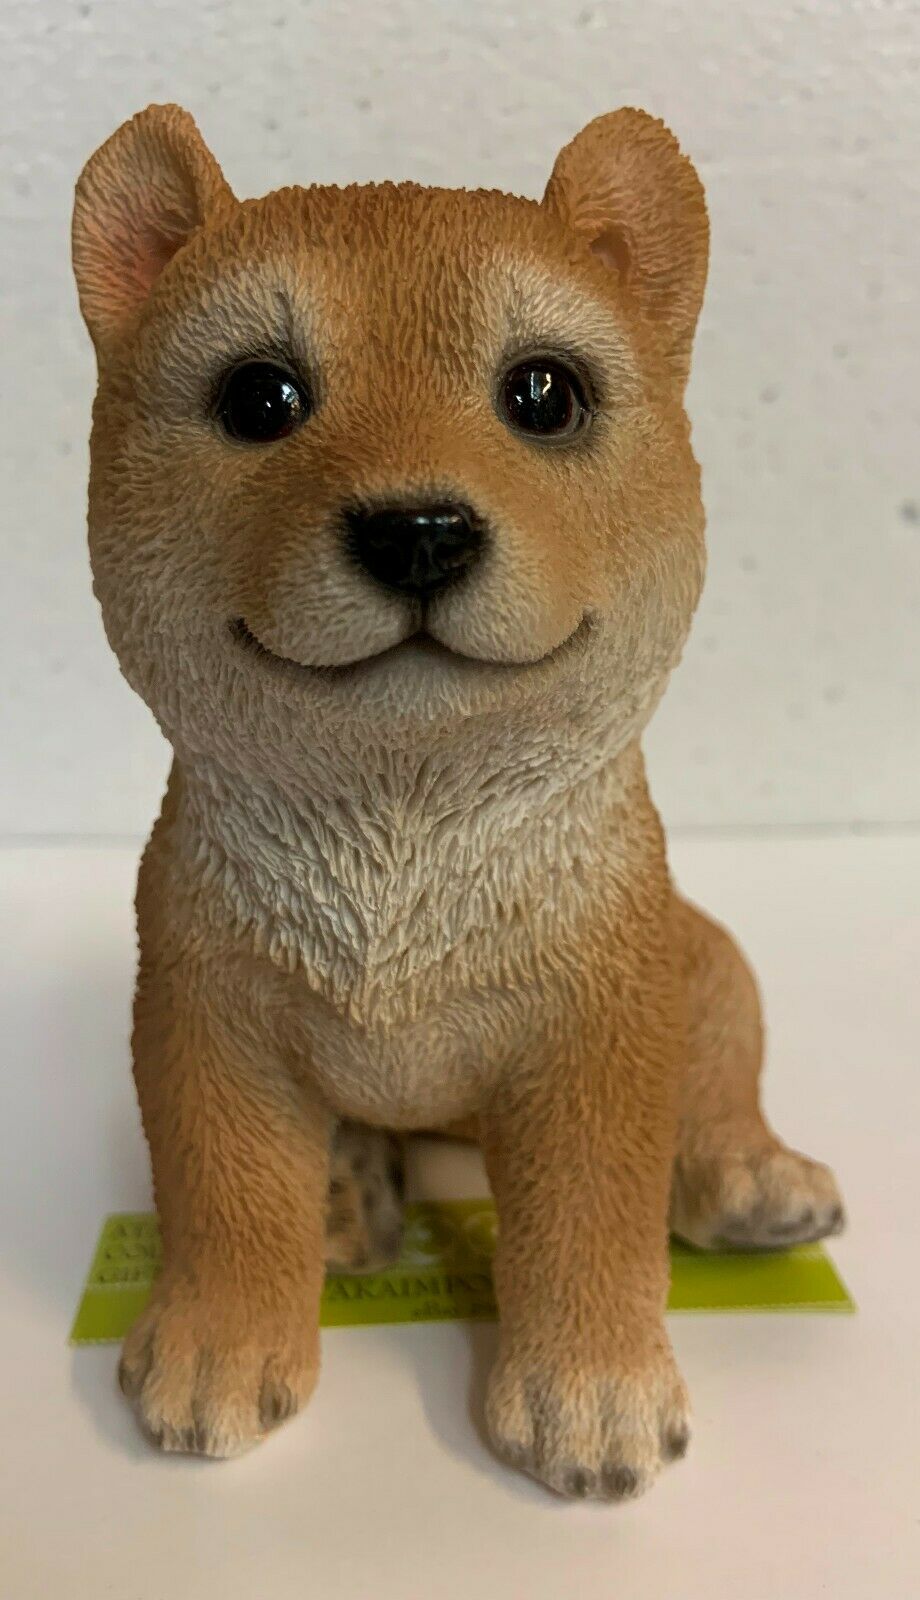 Red Shiba Inu Japanese Spitz Dog Breed Figurine Statue Pet Pal  5 Inches Tall